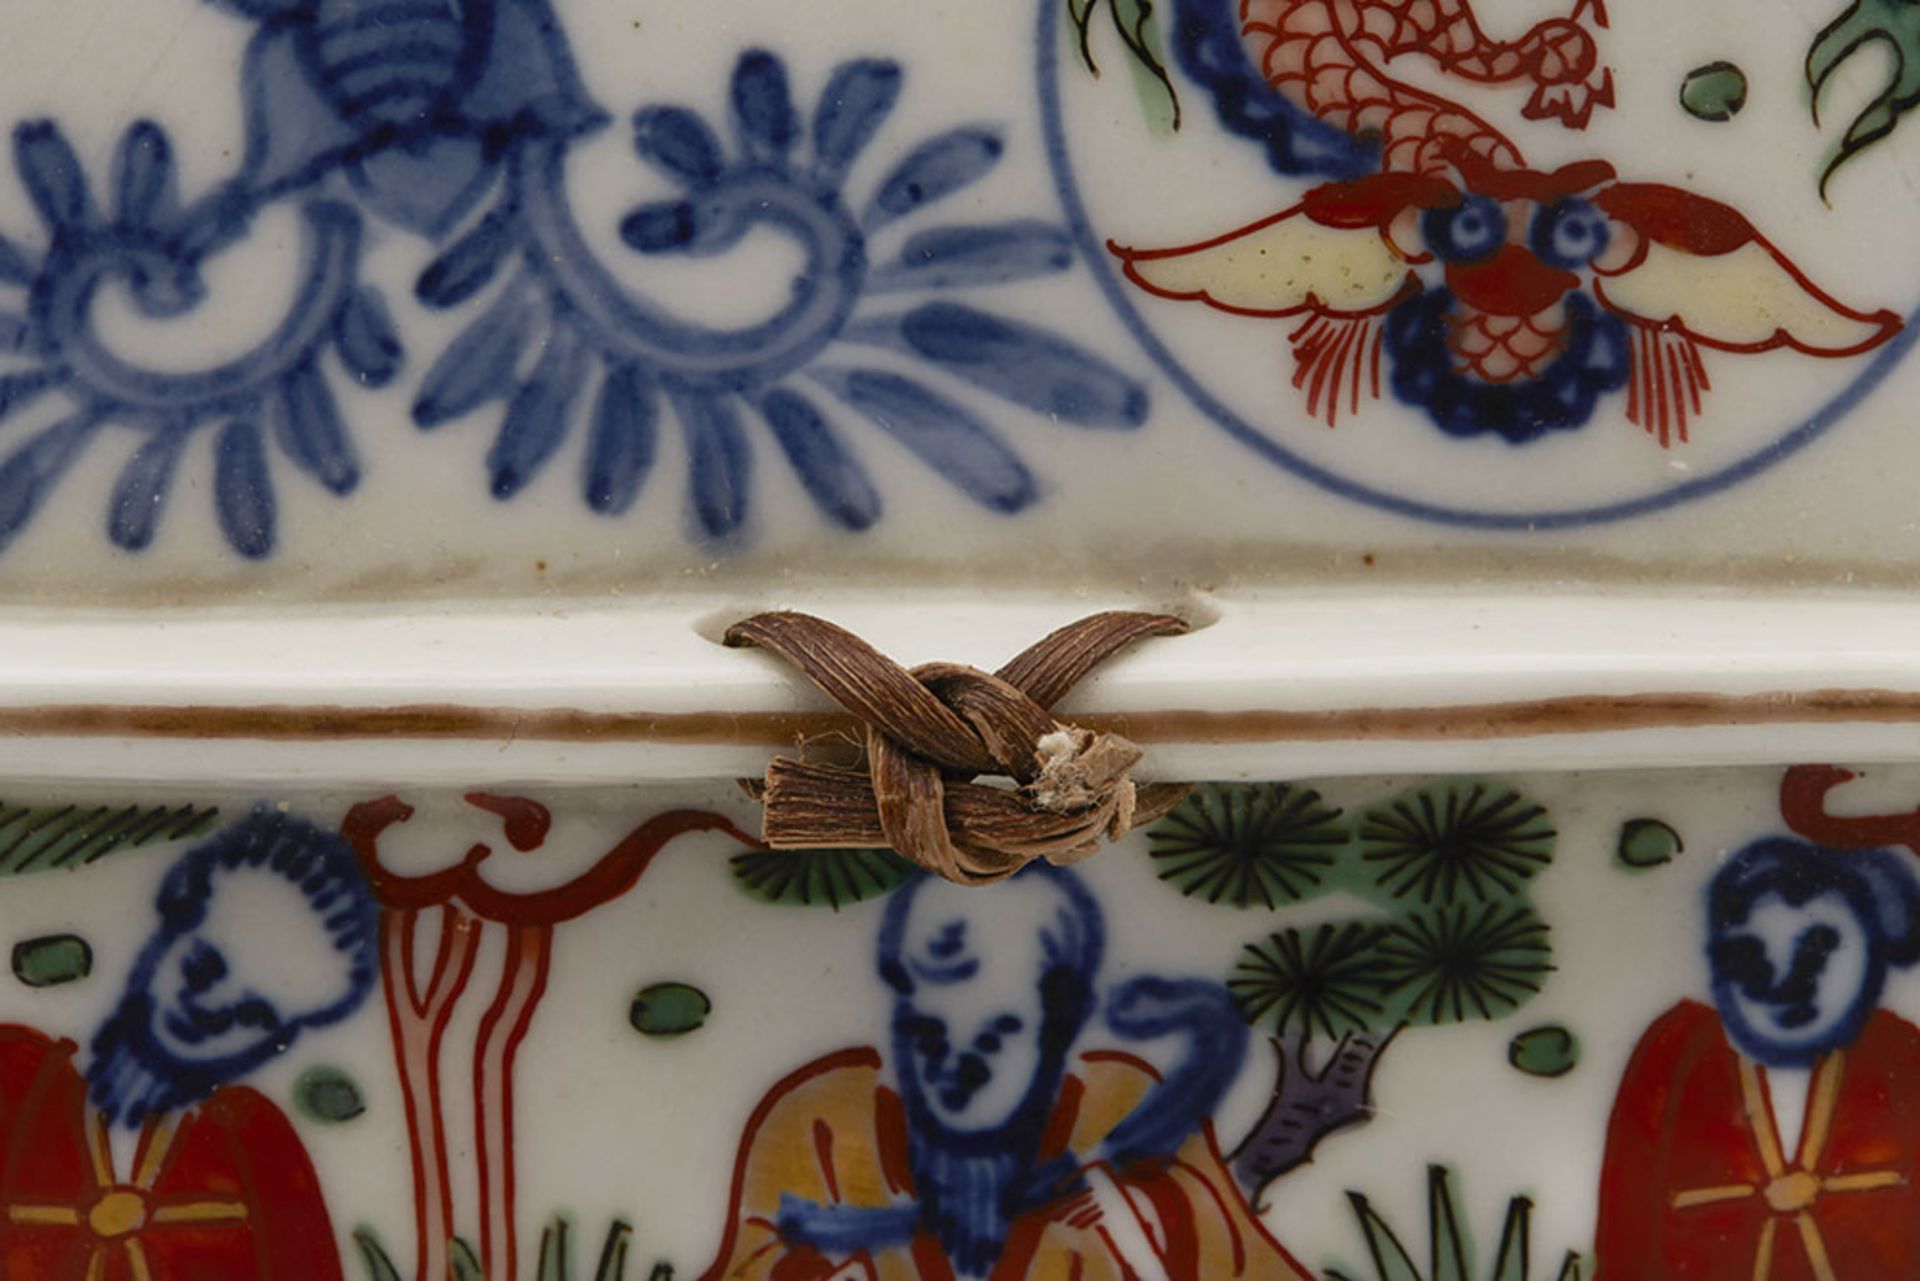 Superb Vintage Chinese Wucai Figural Lidded Rice Bowl With Dragons 20Th C. - Image 11 of 11